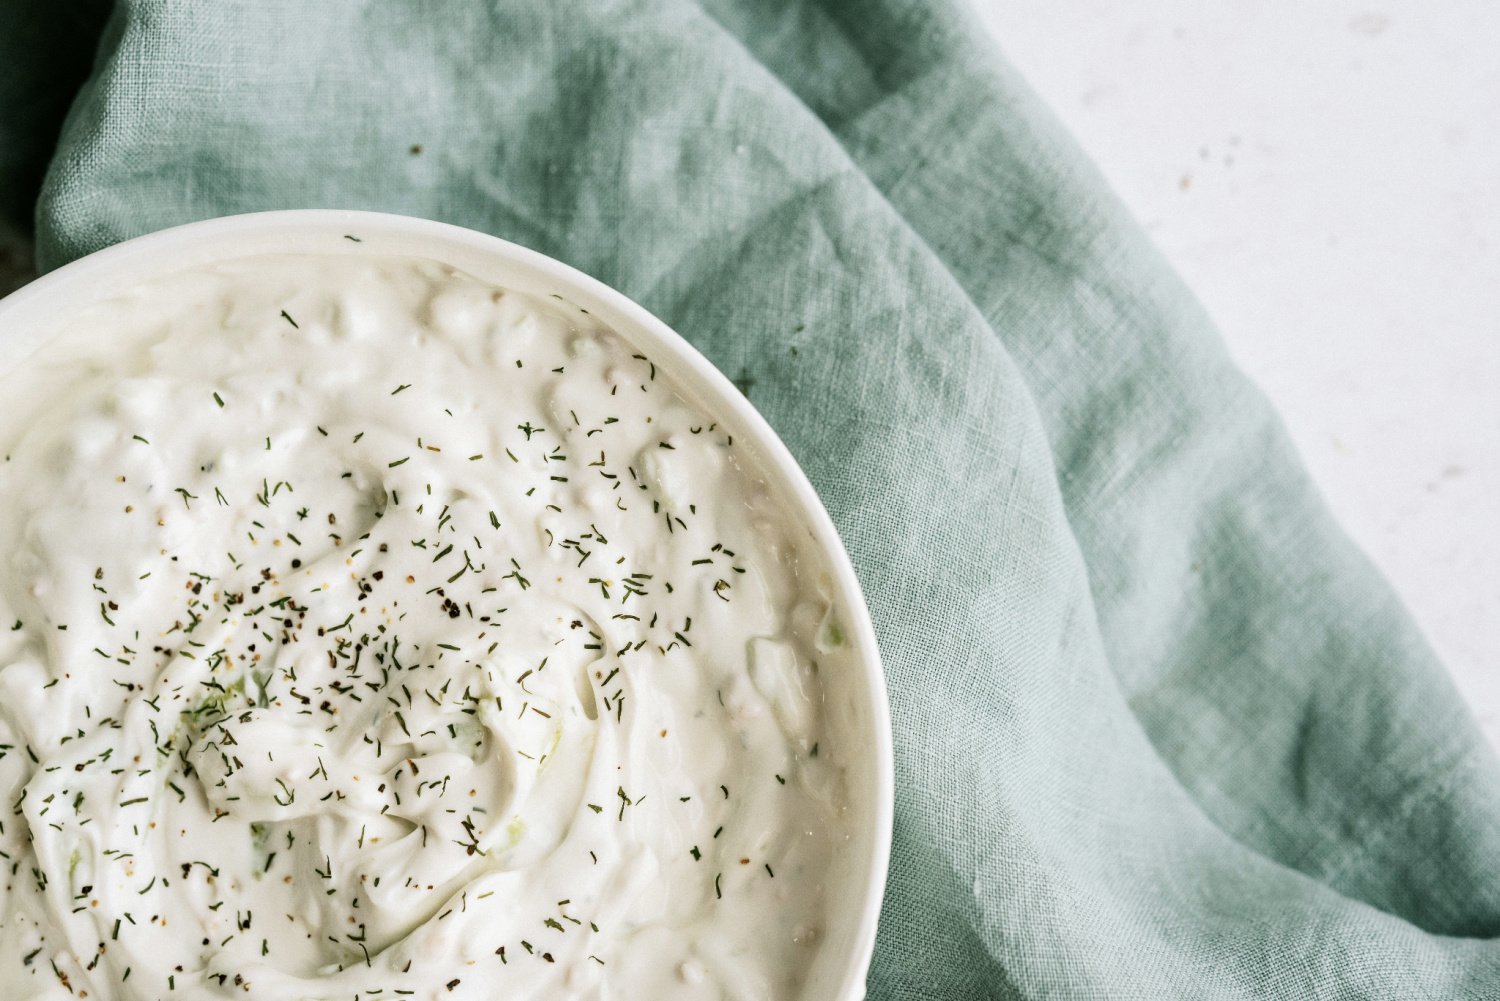 homemade tzatziki sauce in a white bowl with dill weed sprinkled on top